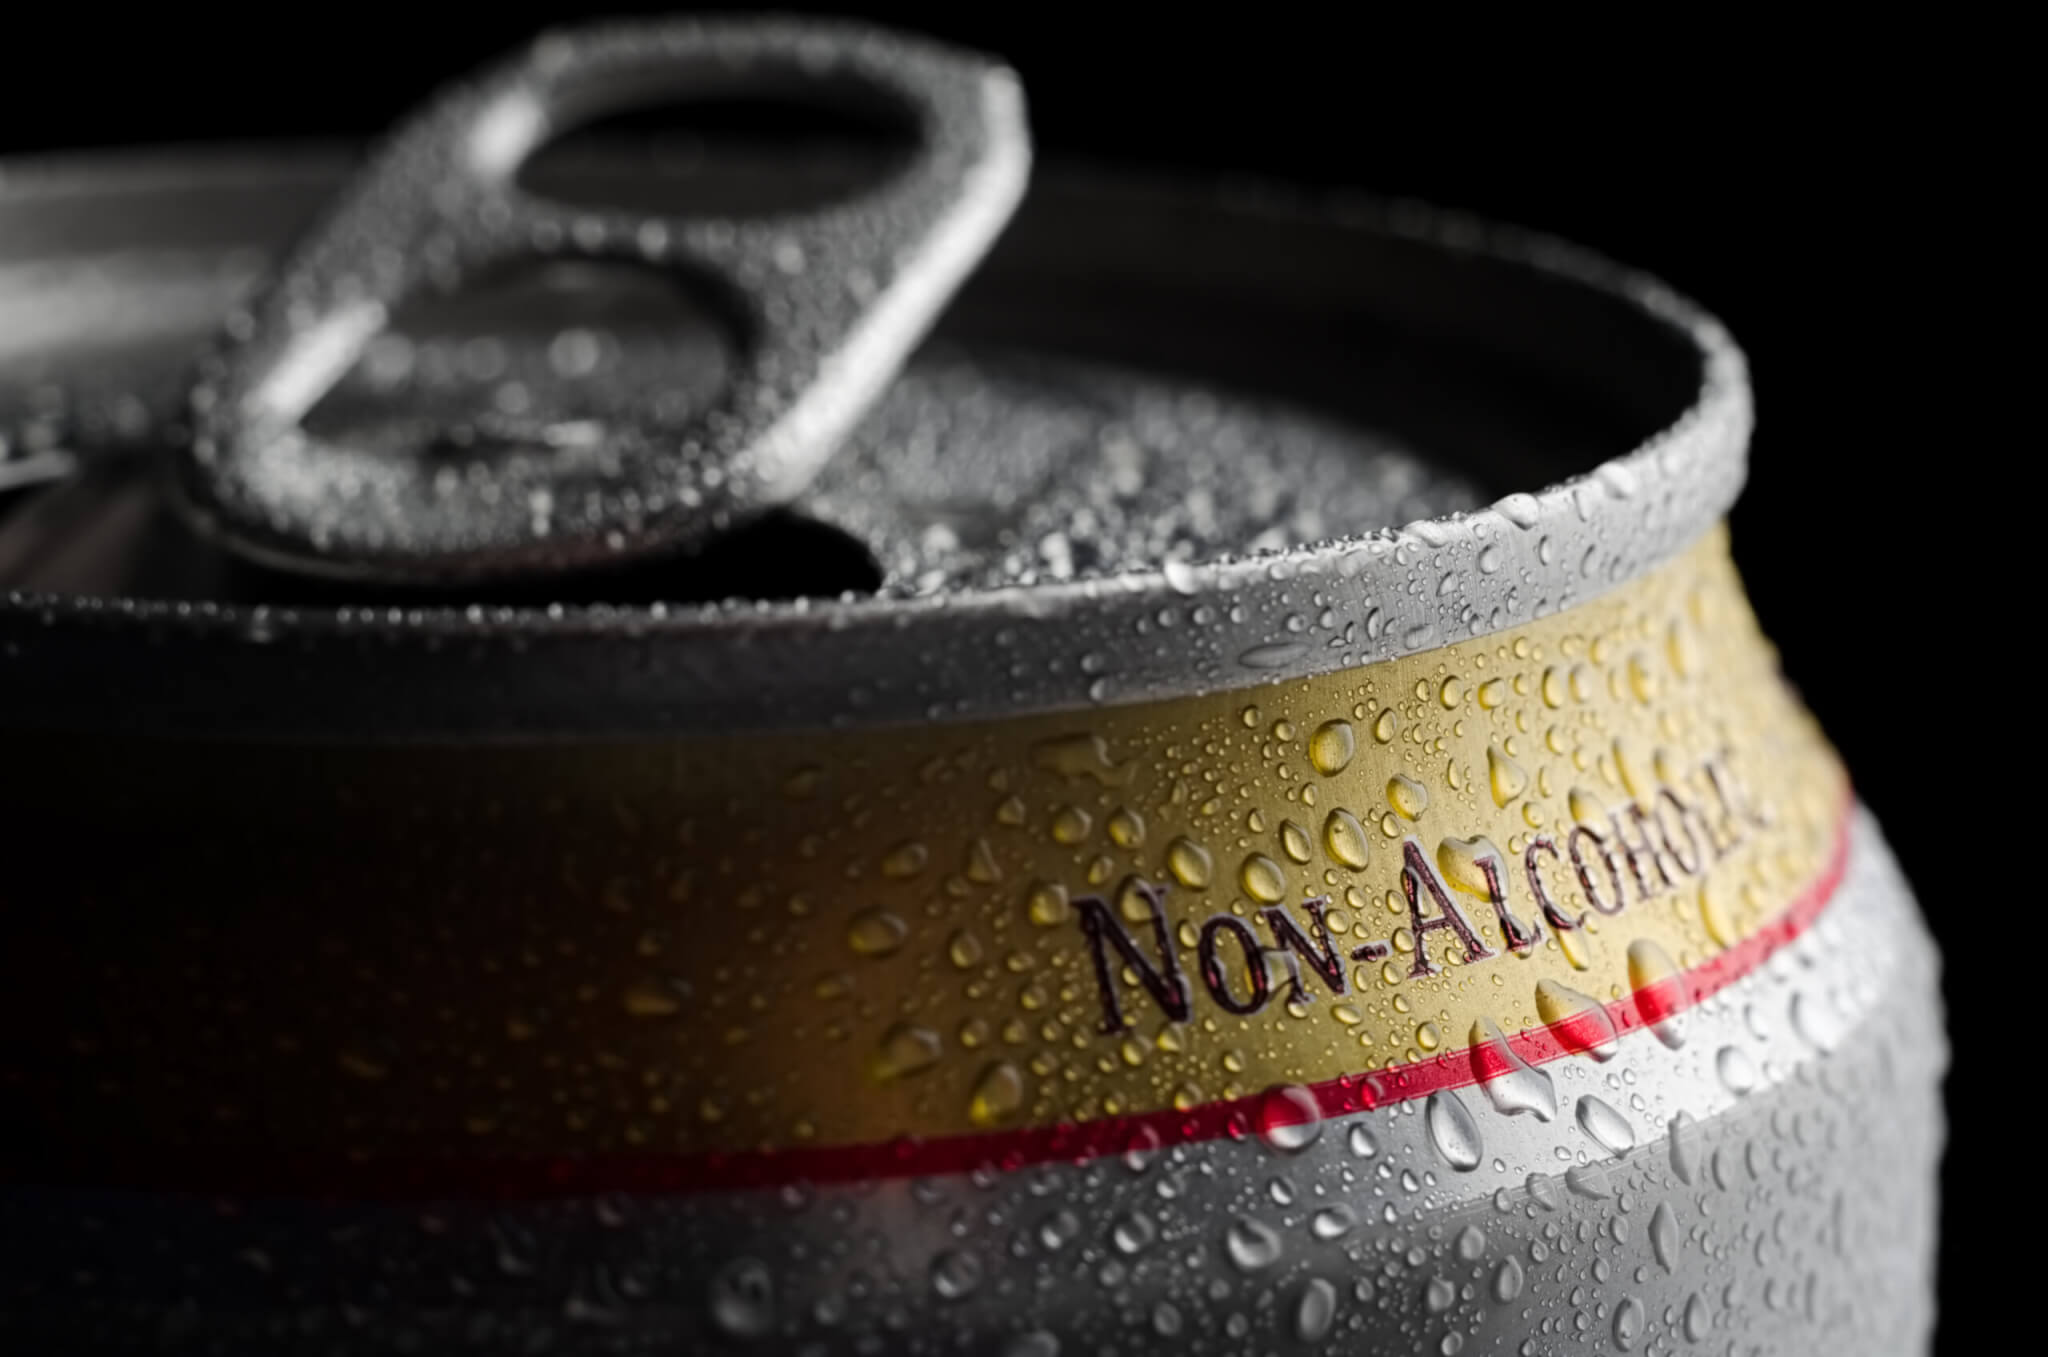 Non-alcoholic beverage can